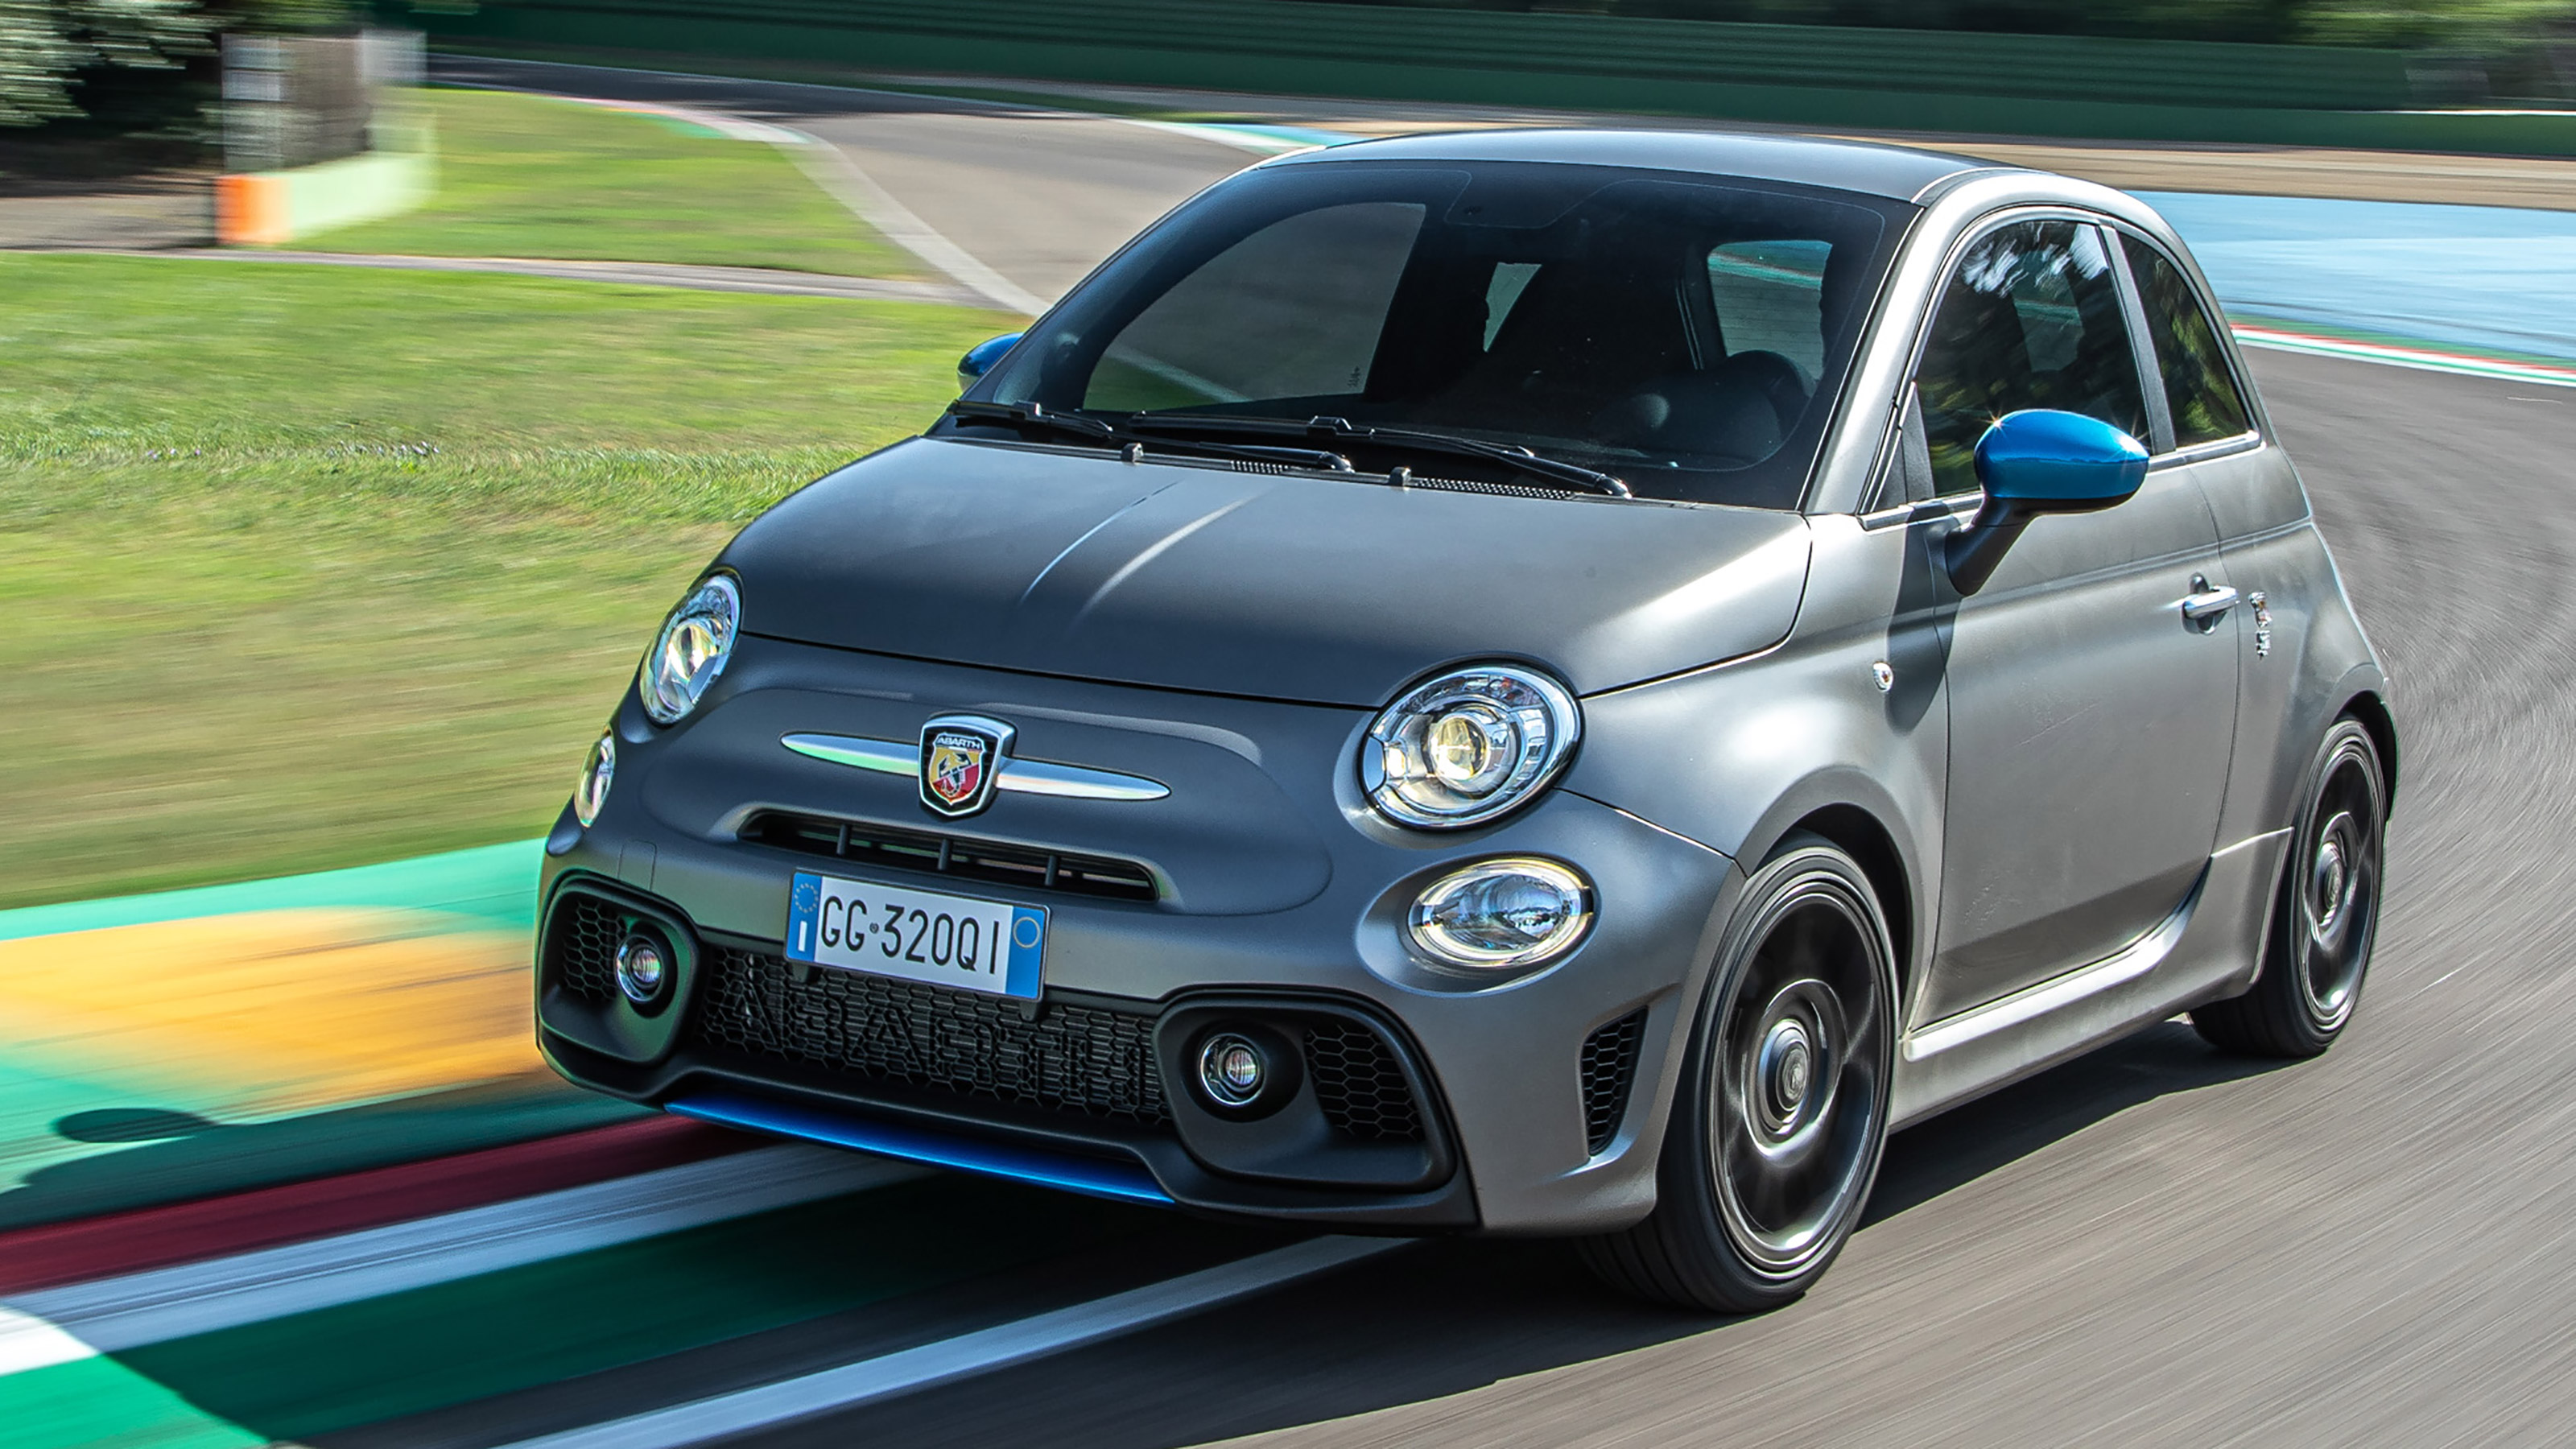 Hotter Hatches: Abarth Rolls Out Special Edition Fiat 500, Punto Models